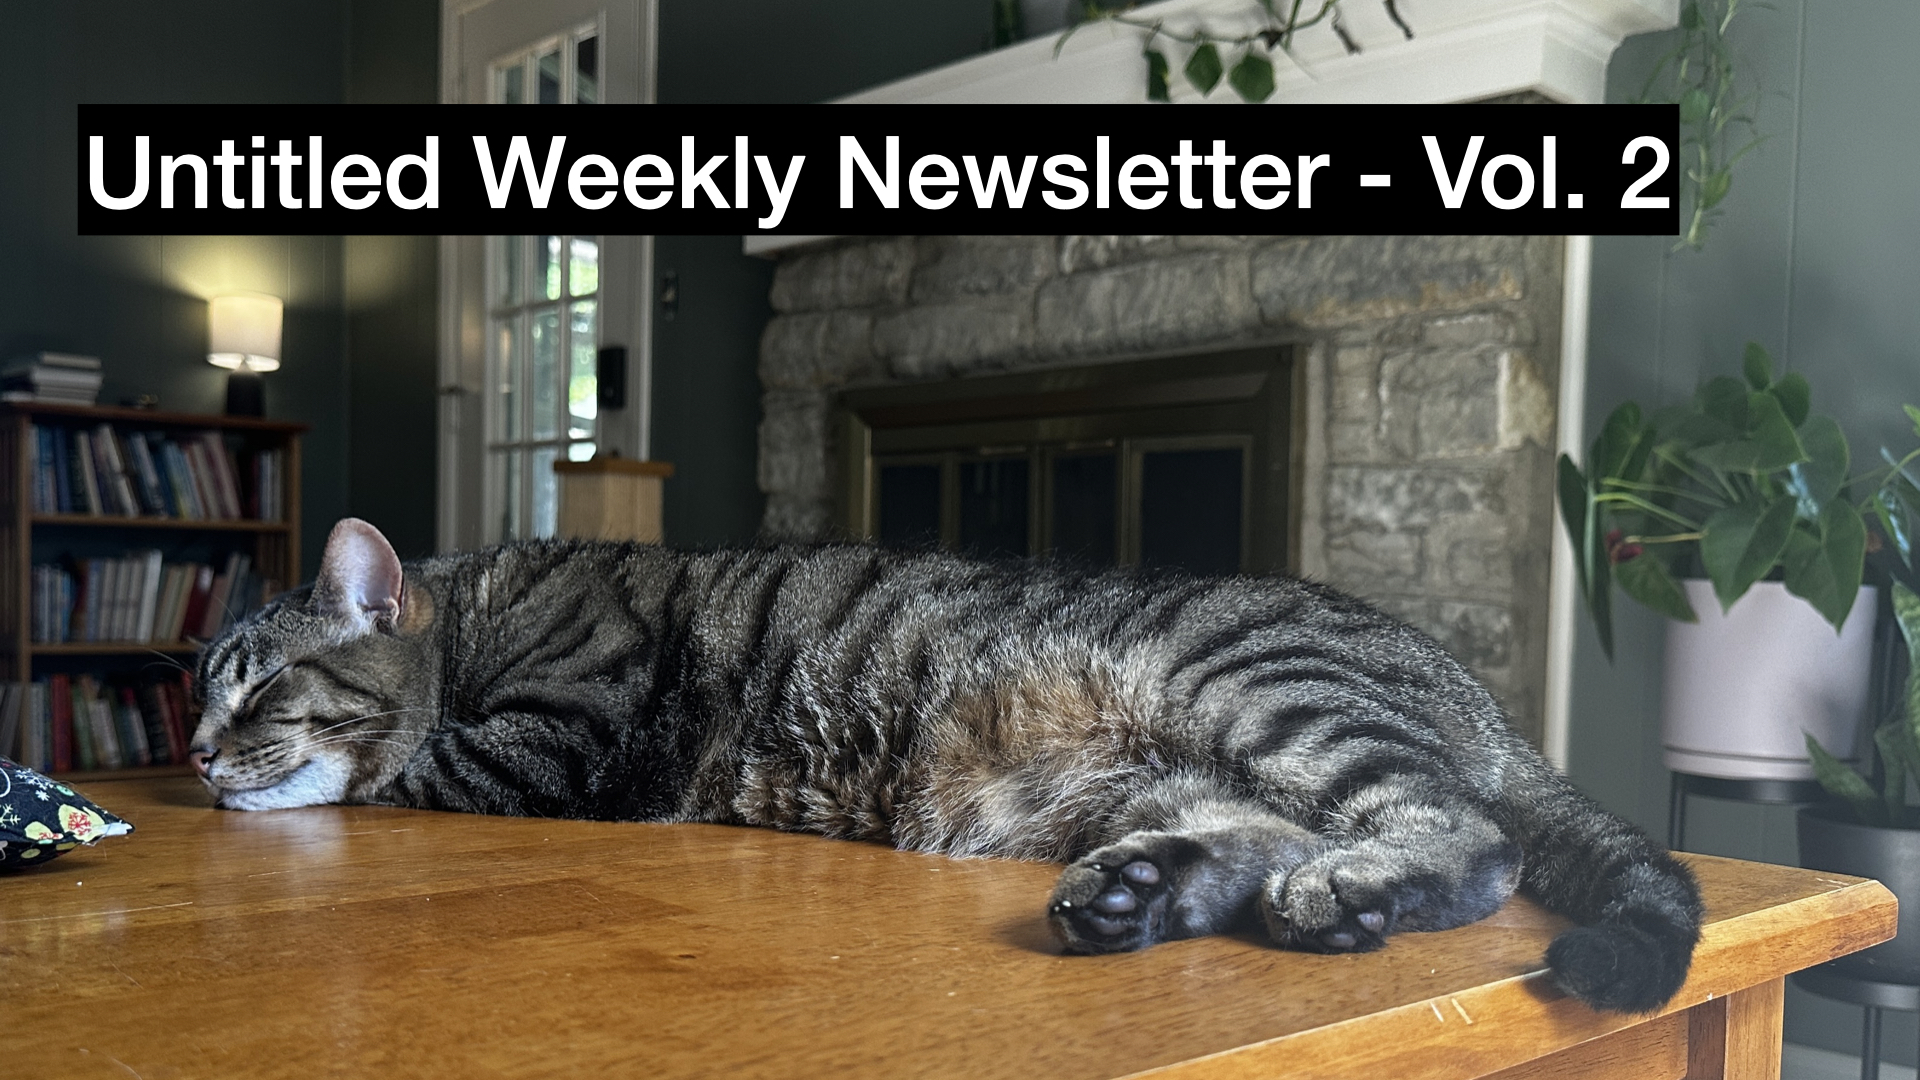 a picture of a shorthair brown tabby laying on its side on a table and sleeping with overlaid text that says "Untitled Weekly Newsletter Volume 2"